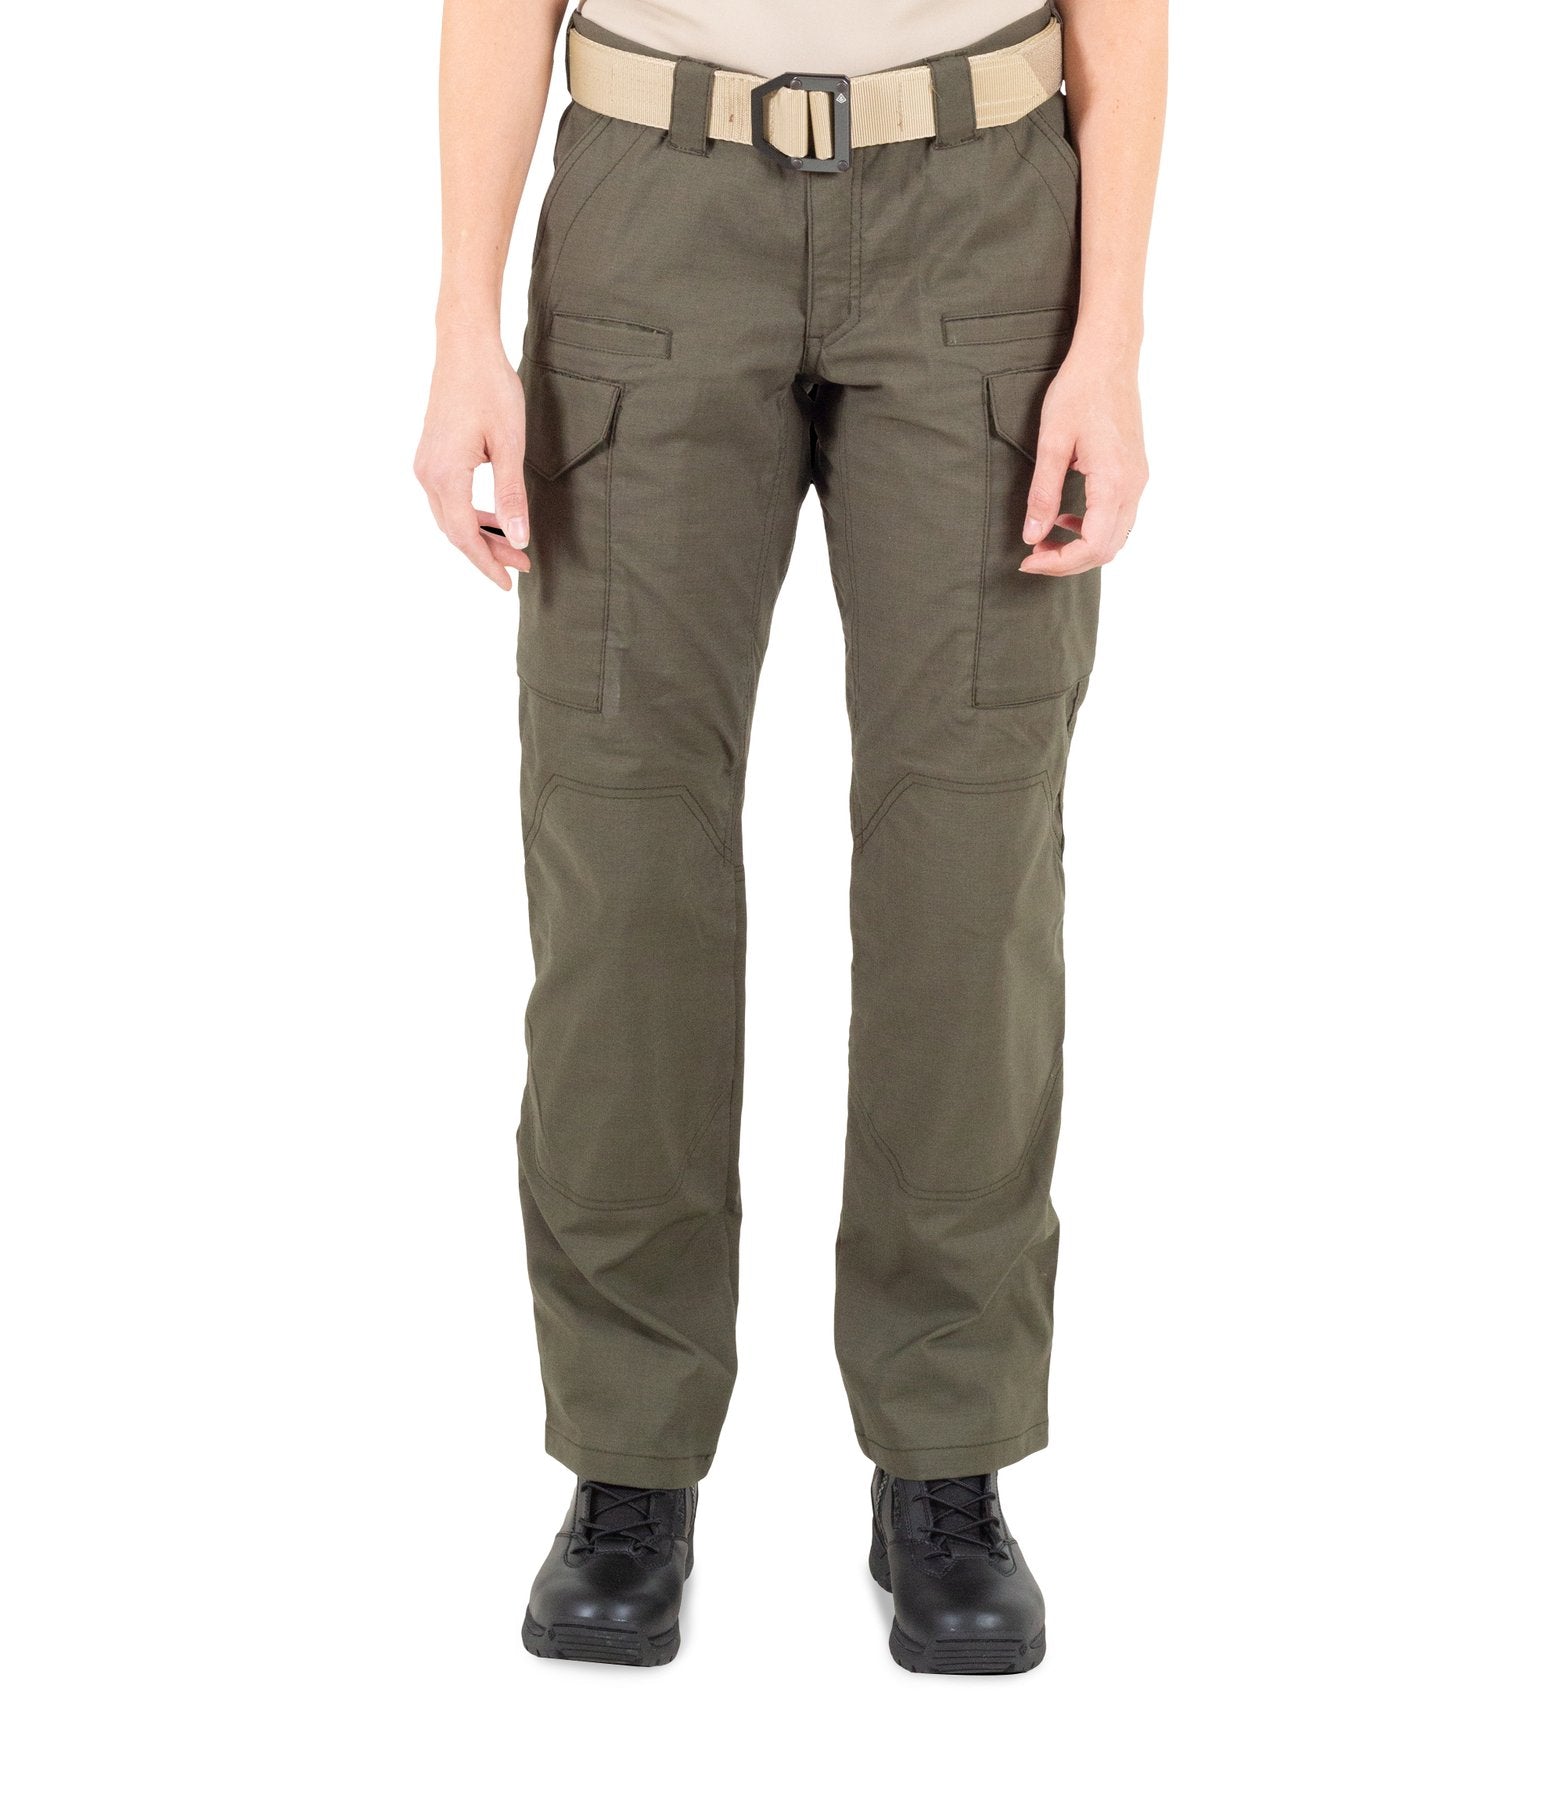 First Tactical Women's V2 Tactical Pants Midnight Navy – Tactical